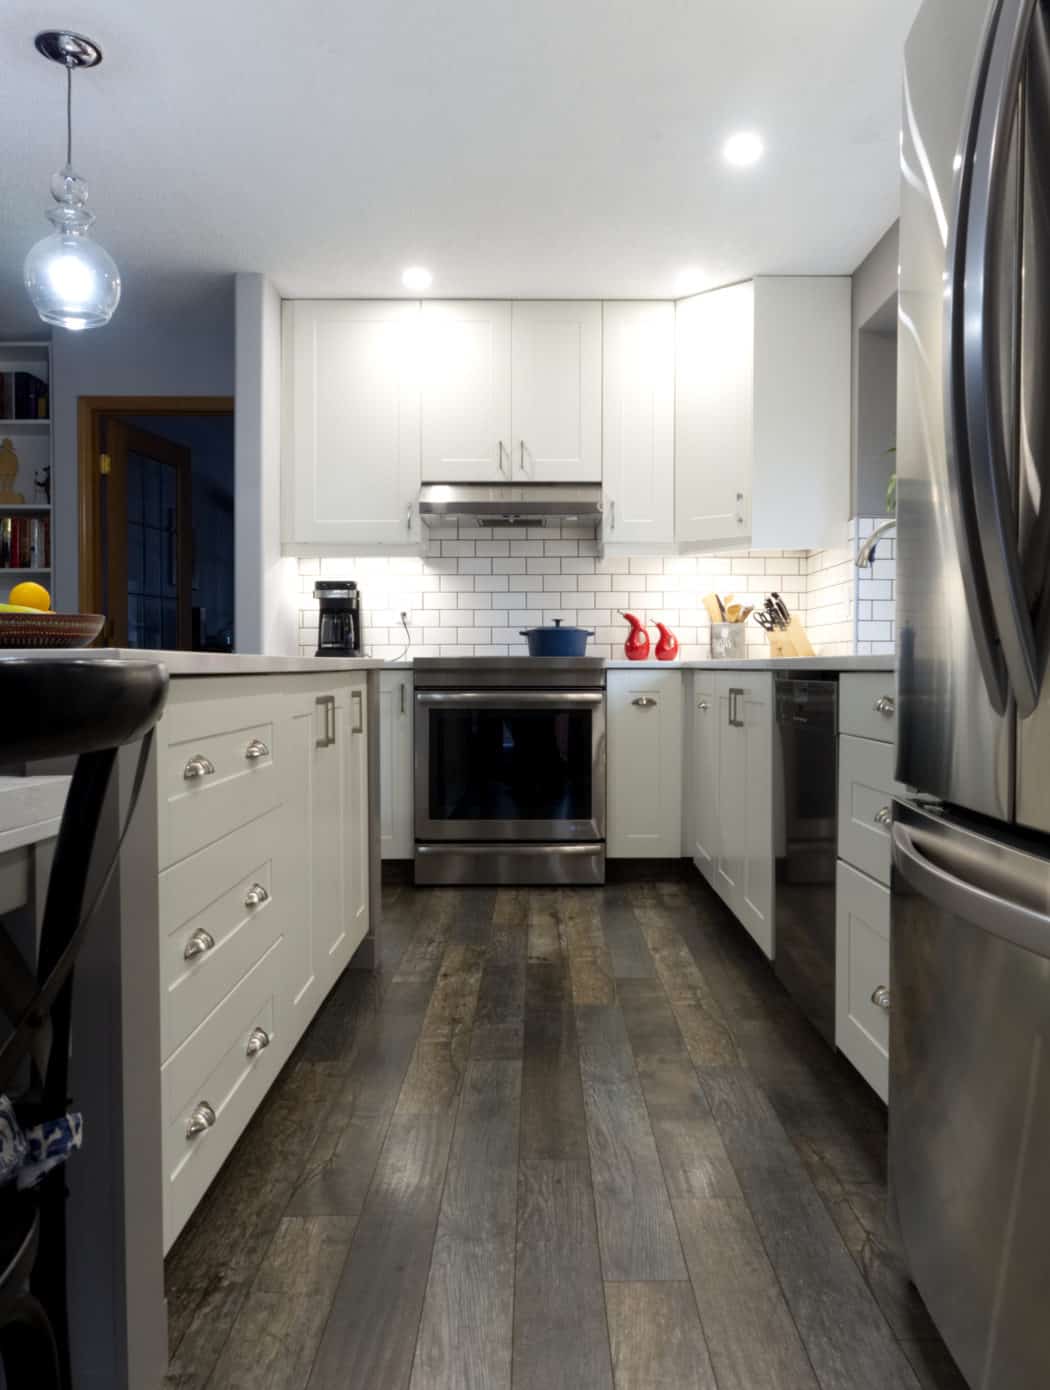 Ikea Kitchen Review Pros Cons And, Ikea Canada Lower Kitchen Cabinets